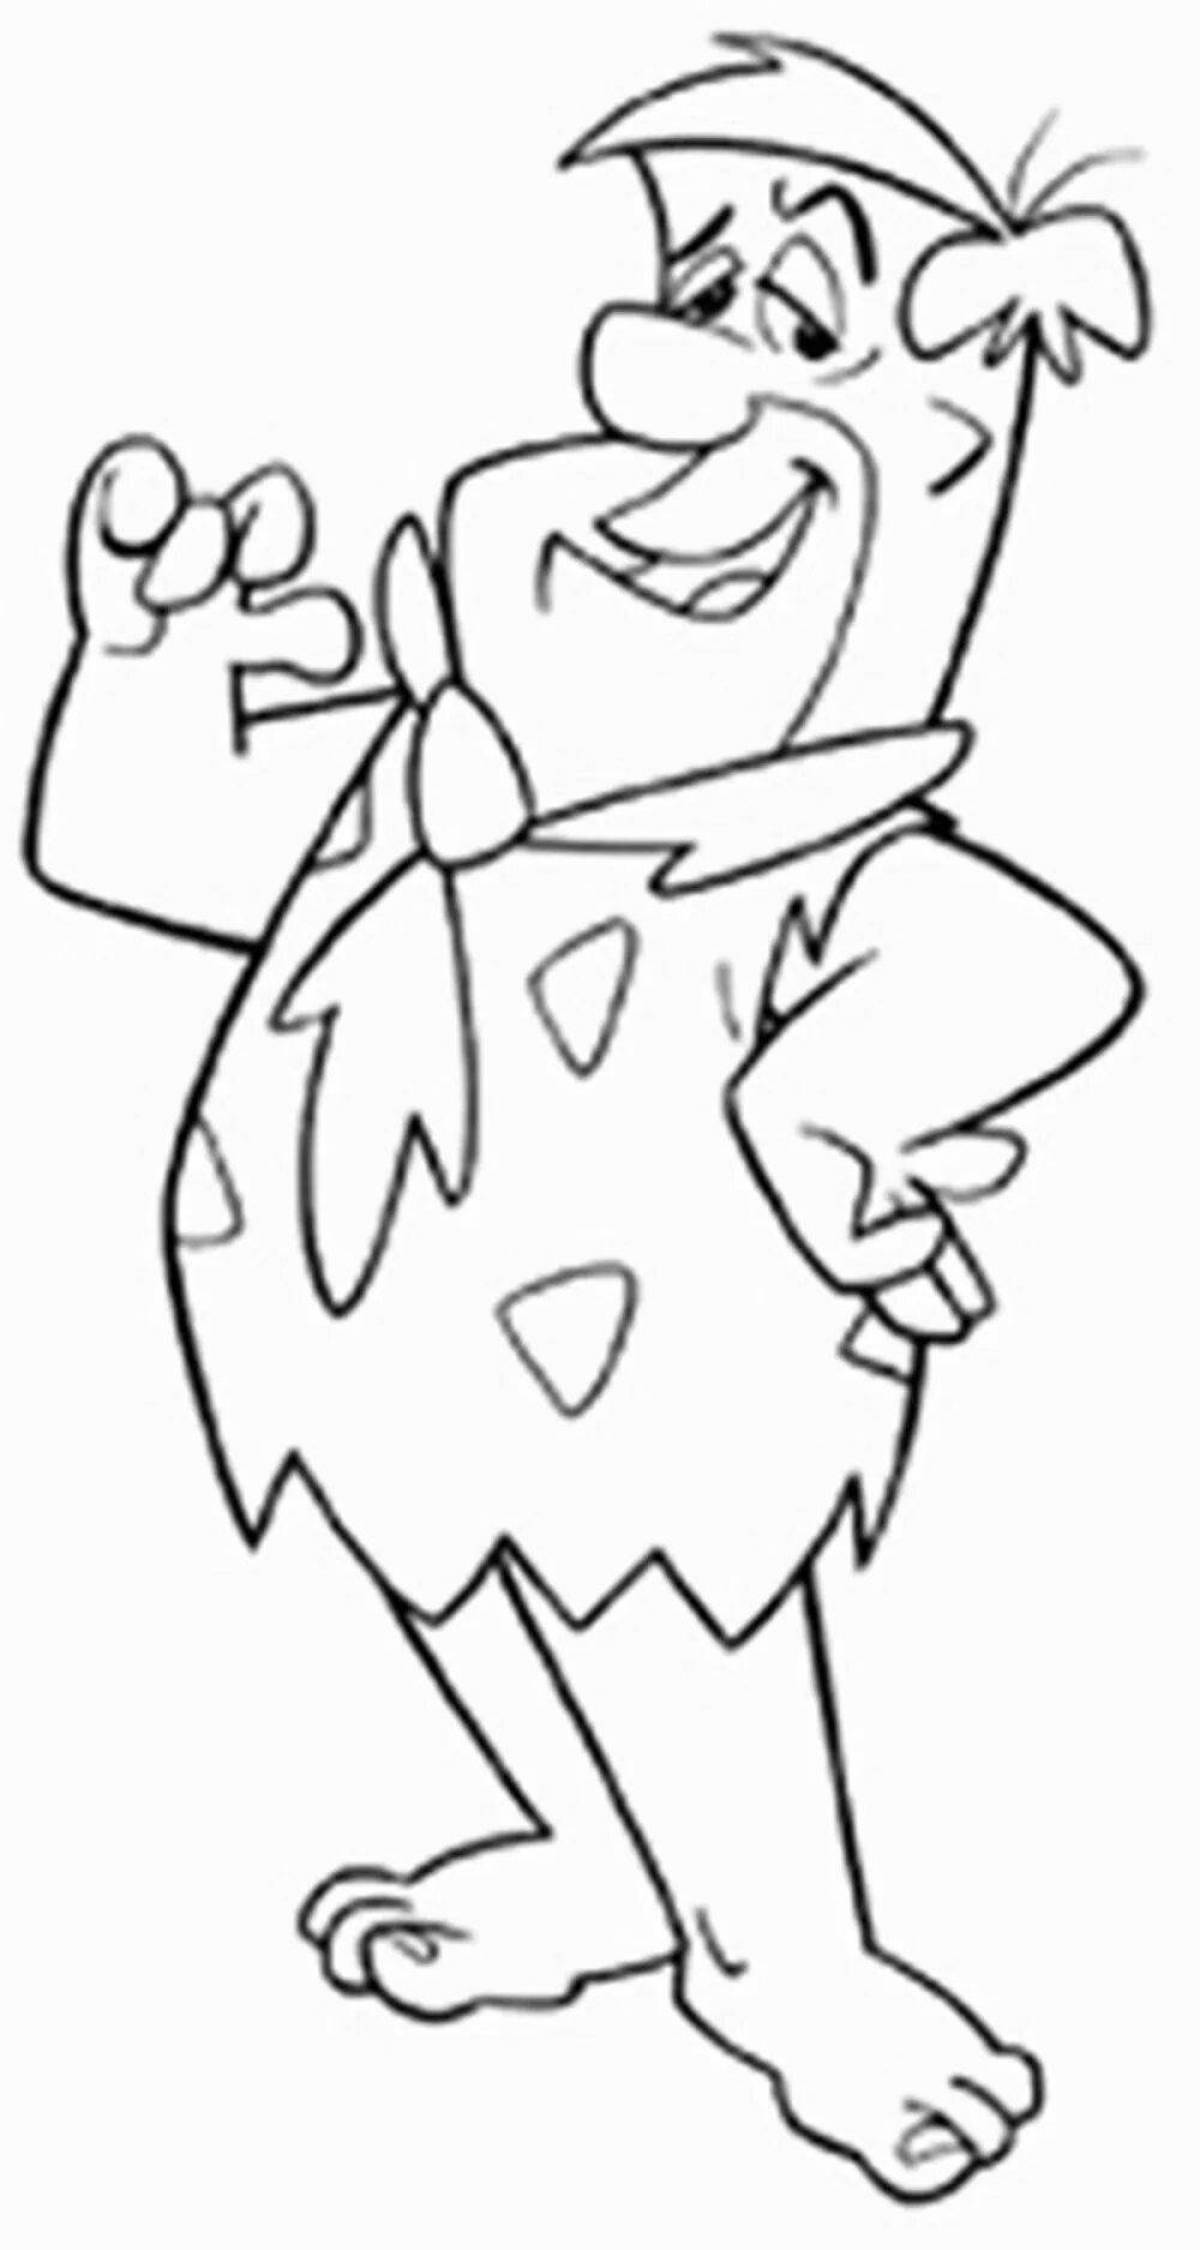 Cute fred flintstone coloring page